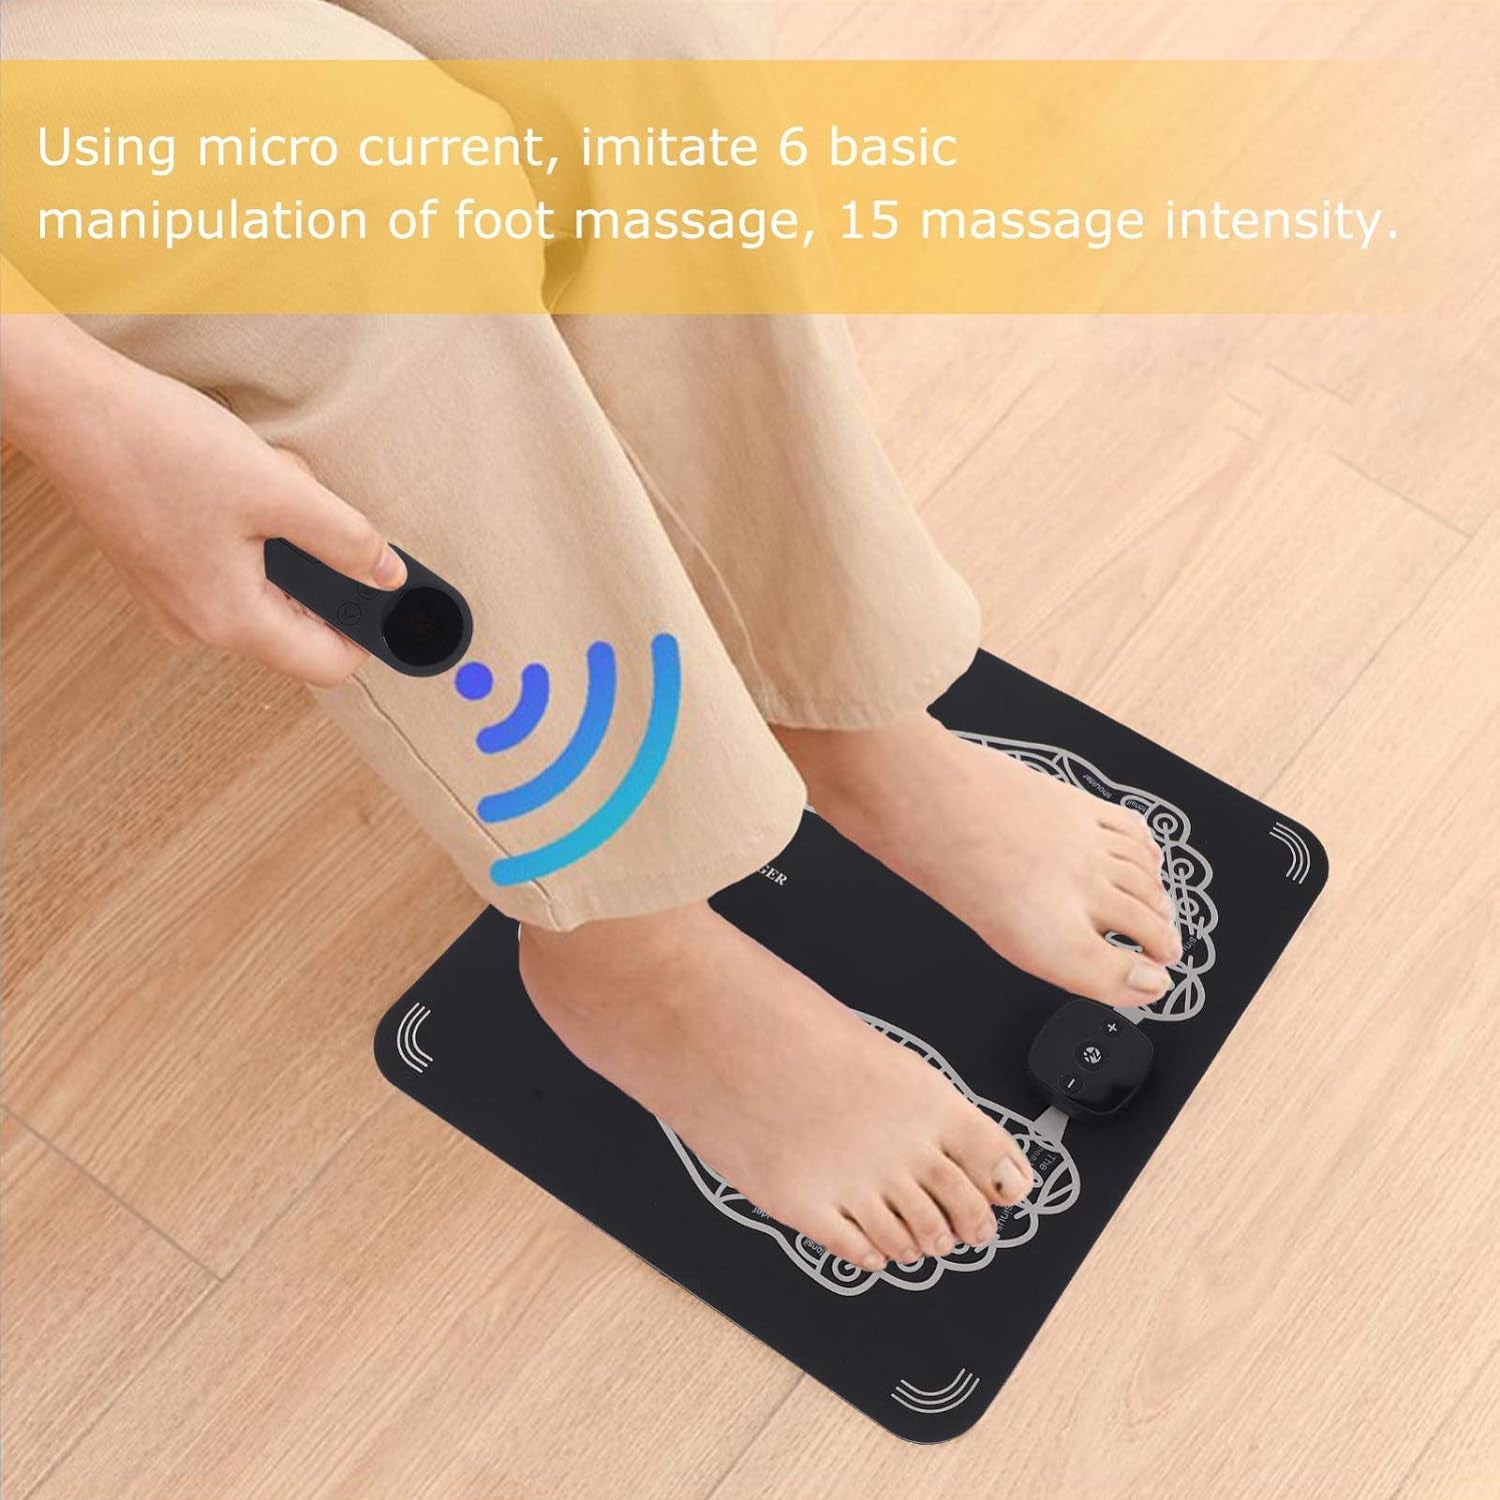 12616 Remote Control Massage, USB Foot Massager, Electric EMS Foot Massage Machine, Rechargeable Portable Folding Automatic with 8 Mode 19 Intensity, 15 Minute Auto Run for Legs, Body, Hand Therapy